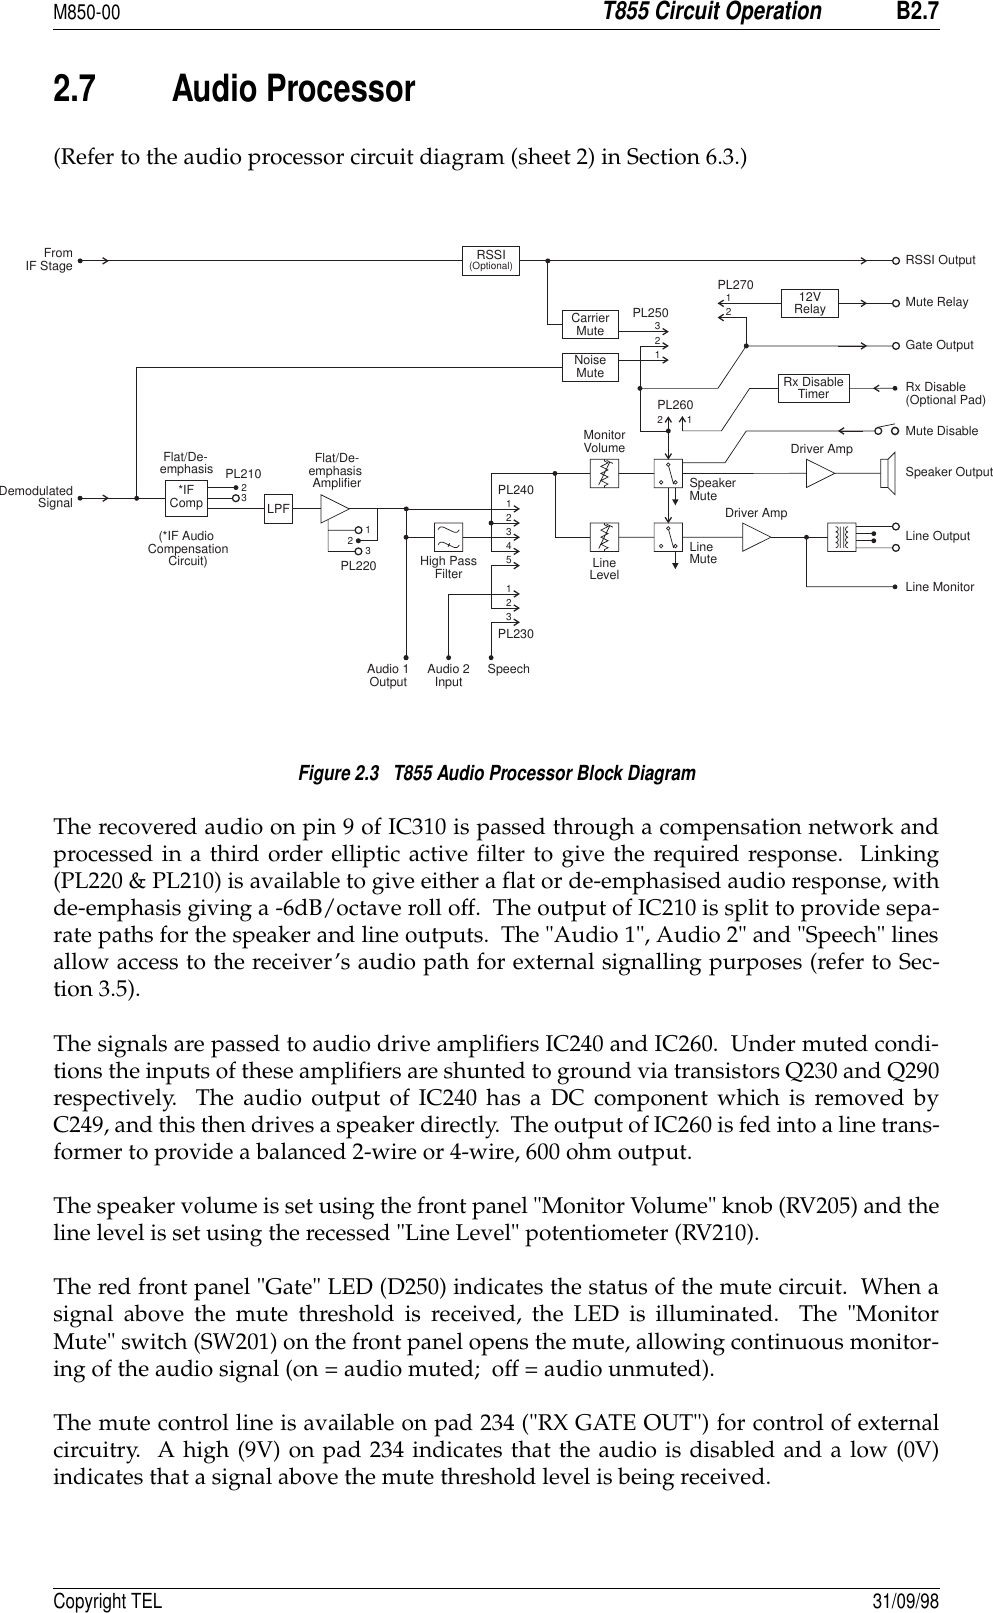 M850-00T855 Circuit OperationB2.7Copyright TEL 31/09/982.7 Audio Processor(Refer to the audio processor circuit diagram (sheet 2) in Section 6.3.)Figure 2.3   T855 Audio Processor Block DiagramThe recovered audio on pin 9 of IC310 is passed through a compensation network andprocessed in a third order elliptic active filter to give the required response.  Linking(PL220 &amp; PL210) is available to give either a flat or de-emphasised audio response, withde-emphasis giving a -6dB/octave roll off.  The output of IC210 is split to provide sepa-rate paths for the speaker and line outputs.  The &quot;Audio 1&quot;, Audio 2&quot; and &quot;Speech&quot; linesallow access to the receiver’s audio path for external signalling purposes (refer to Sec-tion 3.5).The signals are passed to audio drive amplifiers IC240 and IC260.  Under muted condi-tions the inputs of these amplifiers are shunted to ground via transistors Q230 and Q290respectively.  The audio output of IC240 has a DC component which is removed byC249, and this then drives a speaker directly.  The output of IC260 is fed into a line trans-former to provide a balanced 2-wire or 4-wire, 600 ohm output.The speaker volume is set using the front panel &quot;Monitor Volume&quot; knob (RV205) and theline level is set using the recessed &quot;Line Level&quot; potentiometer (RV210).  The red front panel &quot;Gate&quot; LED (D250) indicates the status of the mute circuit.  When asignal above the mute threshold is received, the LED is illuminated.  The &quot;MonitorMute&quot; switch (SW201) on the front panel opens the mute, allowing continuous monitor-ing of the audio signal (on = audio muted;  off = audio unmuted).The mute control line is available on pad 234 (&quot;RX GATE OUT&quot;) for control of externalcircuitry.  A high (9V) on pad 234 indicates that the audio is disabled and a low (0V)indicates that a signal above the mute threshold level is being received.FromIF StageDemodulatedSignal(*IF AudioCompensationCircuit)Driver AmpLine Output12VRelaySpeechAudio 1Output Audio 2InputHigh PassFilterSpeakerMuteLineMuteCarrierMuteRSSI(Optional)Rx DisableTimerNoiseMutePL260PL250PL270RSSI OutputMute RelayGate OutputRx Disable(Optional Pad)Mute DisableSpeaker OutputLine Monitor121221315223341PL240PL230Driver AmpFlat/De-emphasisLPFPL21023Flat/De-emphasisAmplifierPL220123*IFCompMonitorVolumeLineLevel